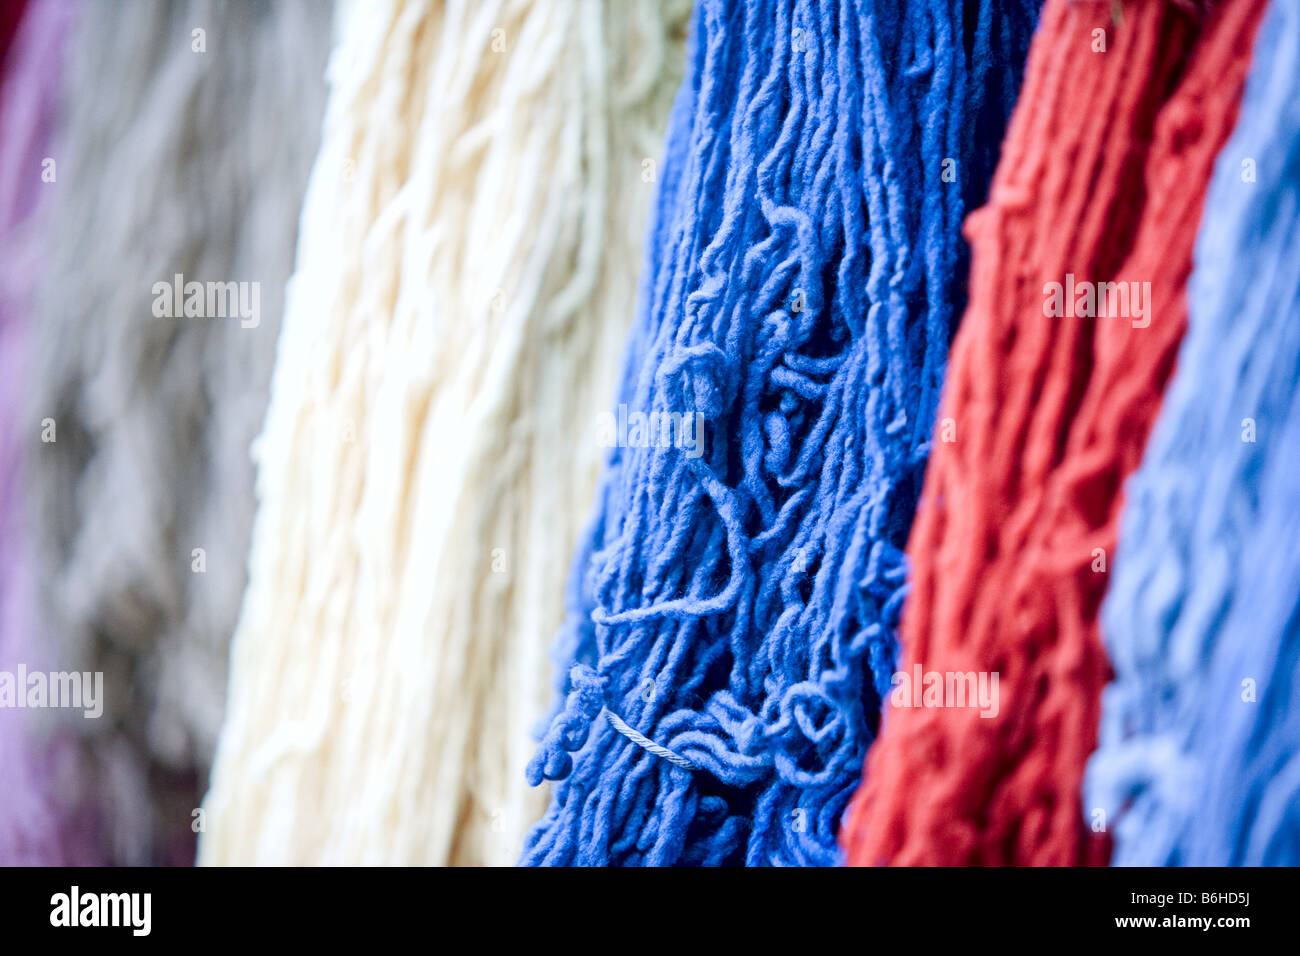 Display of brightly colored string, yarn, cord, and threads in Seoul, South  Korea Stock Photo - Alamy